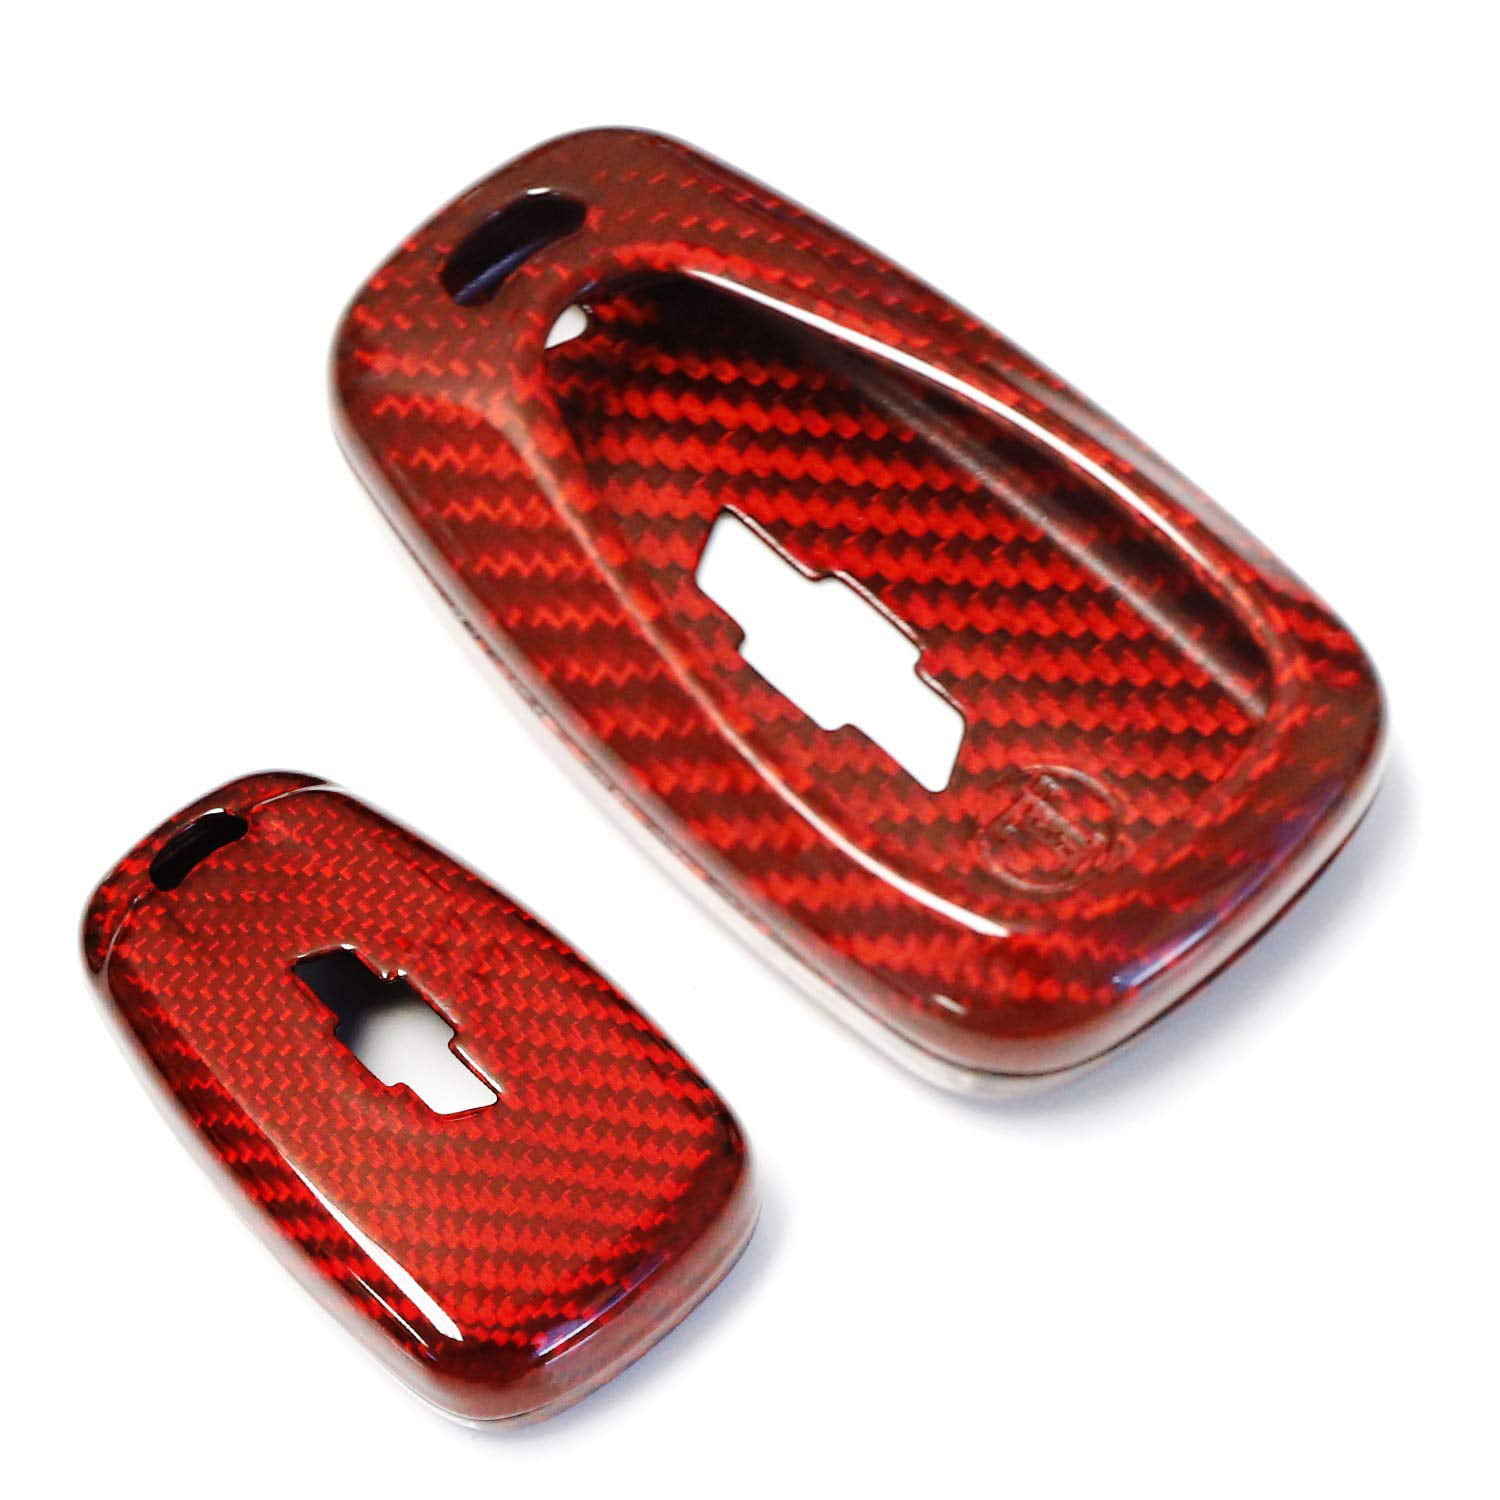 Red 5 button Silicone Cover Case Key Shell For Chevrolet Equinox Camaro Cruze 